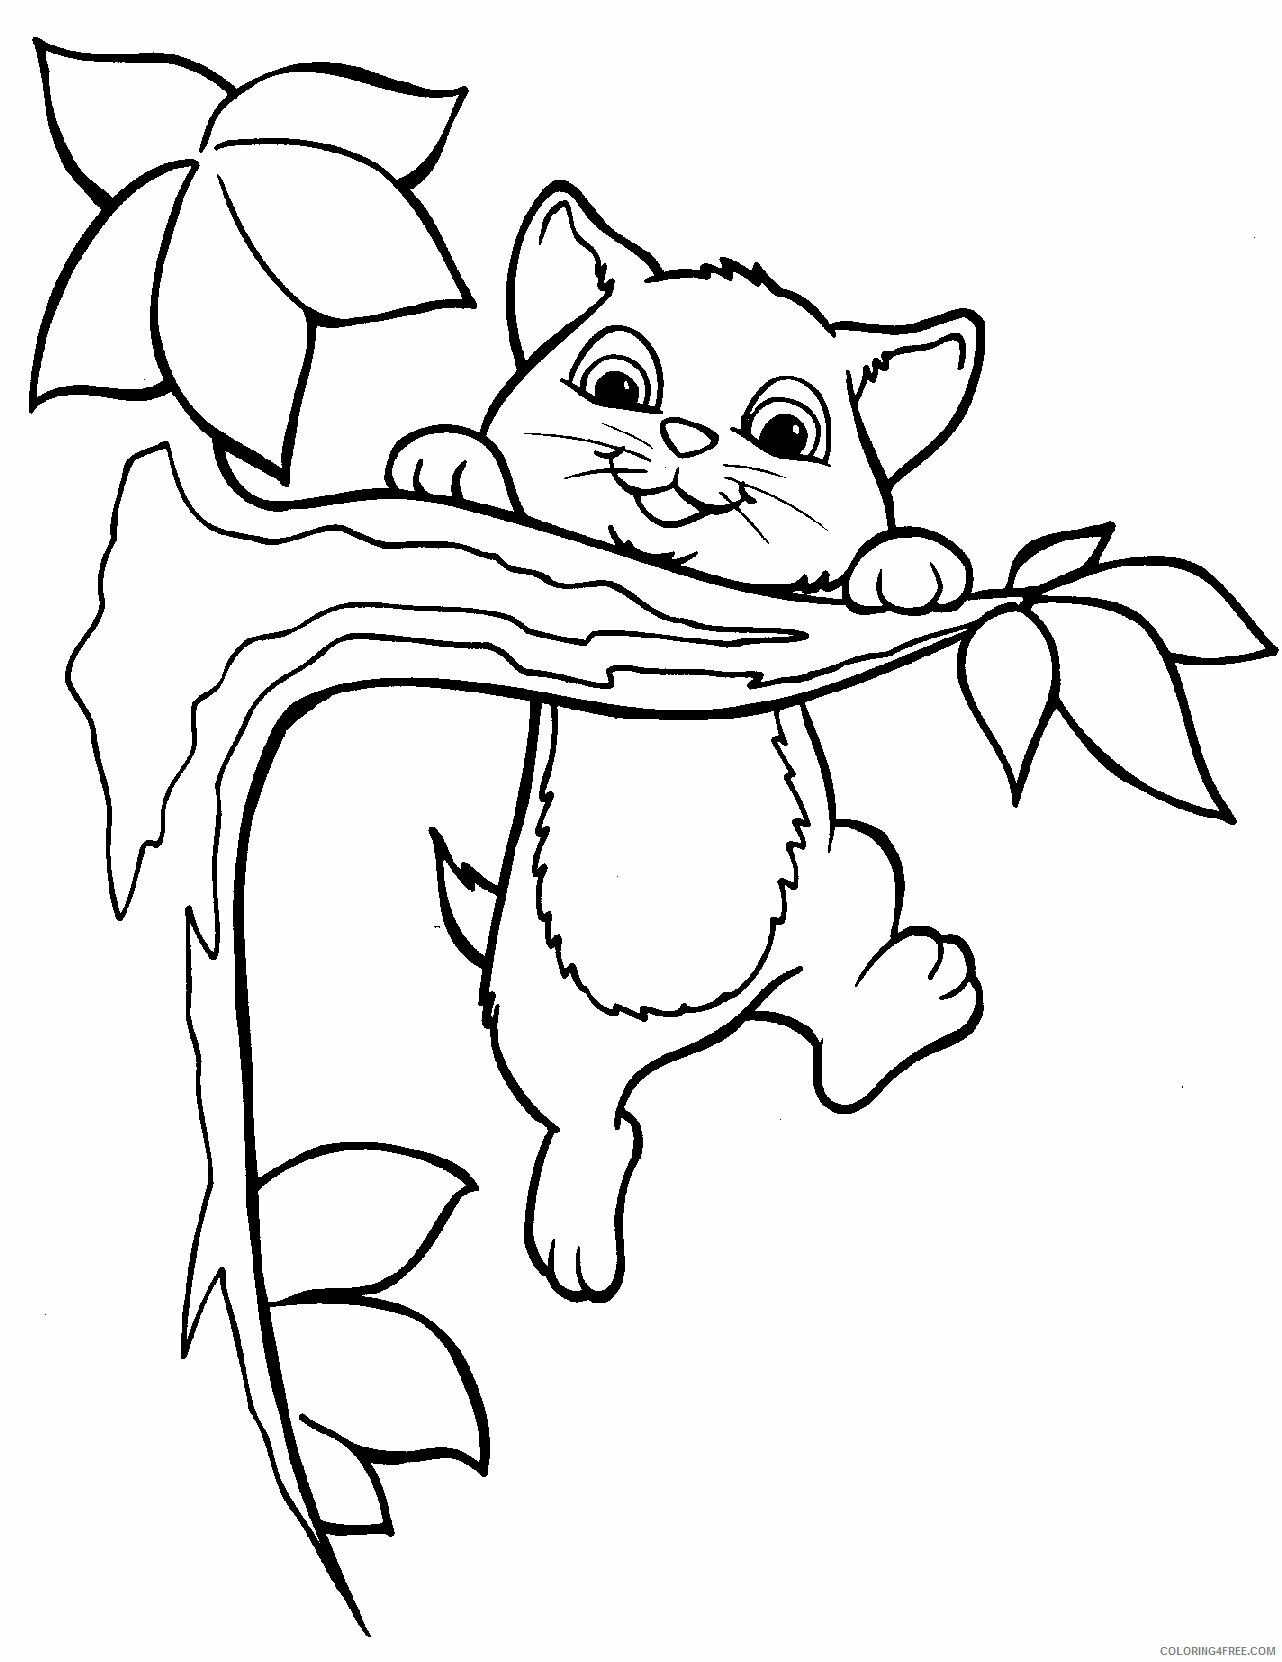 Kitten Coloring Pages Animal Printable Sheets Kitten Free 2021 3006 Coloring4free Coloring4free Com